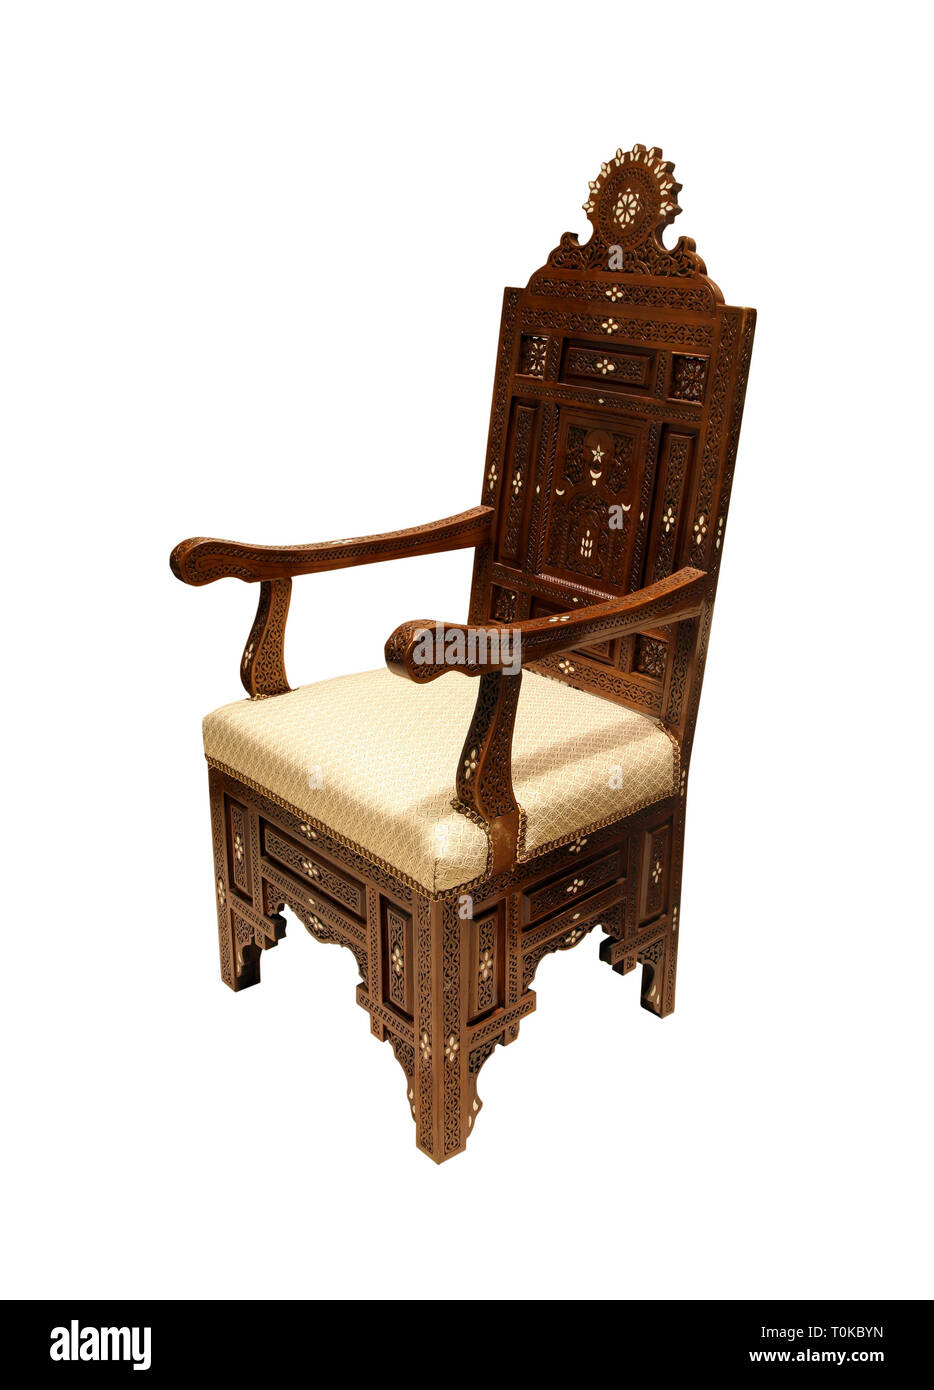 Arabic style chair isolated with clipping path included Stock Photo - Alamy